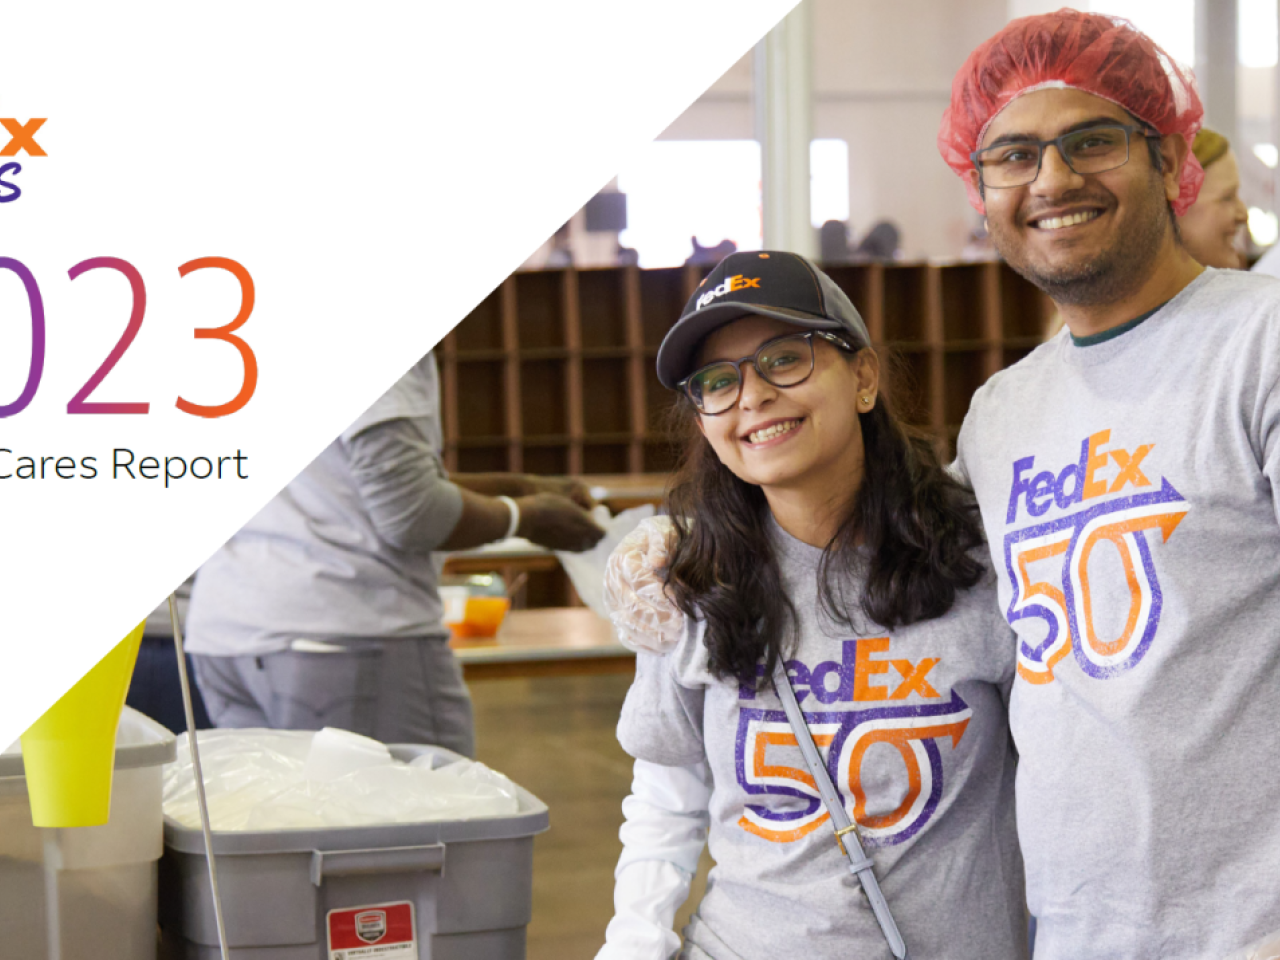 Two smiling people in "FedEx 50" t-shirts. "FedEx Cares 2023" on the side.